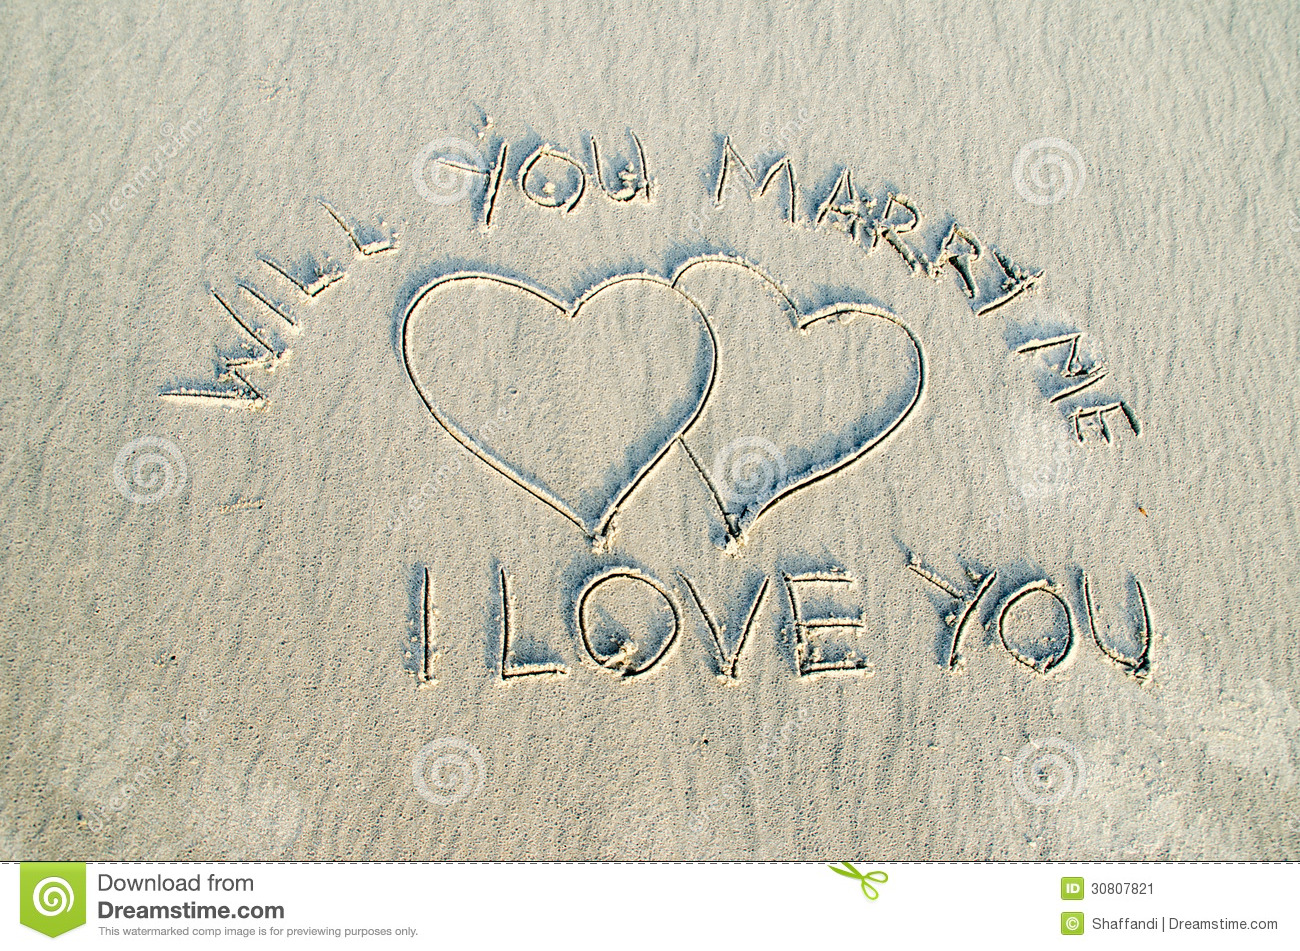 Will You Marry Me I Love You On Beach Sand